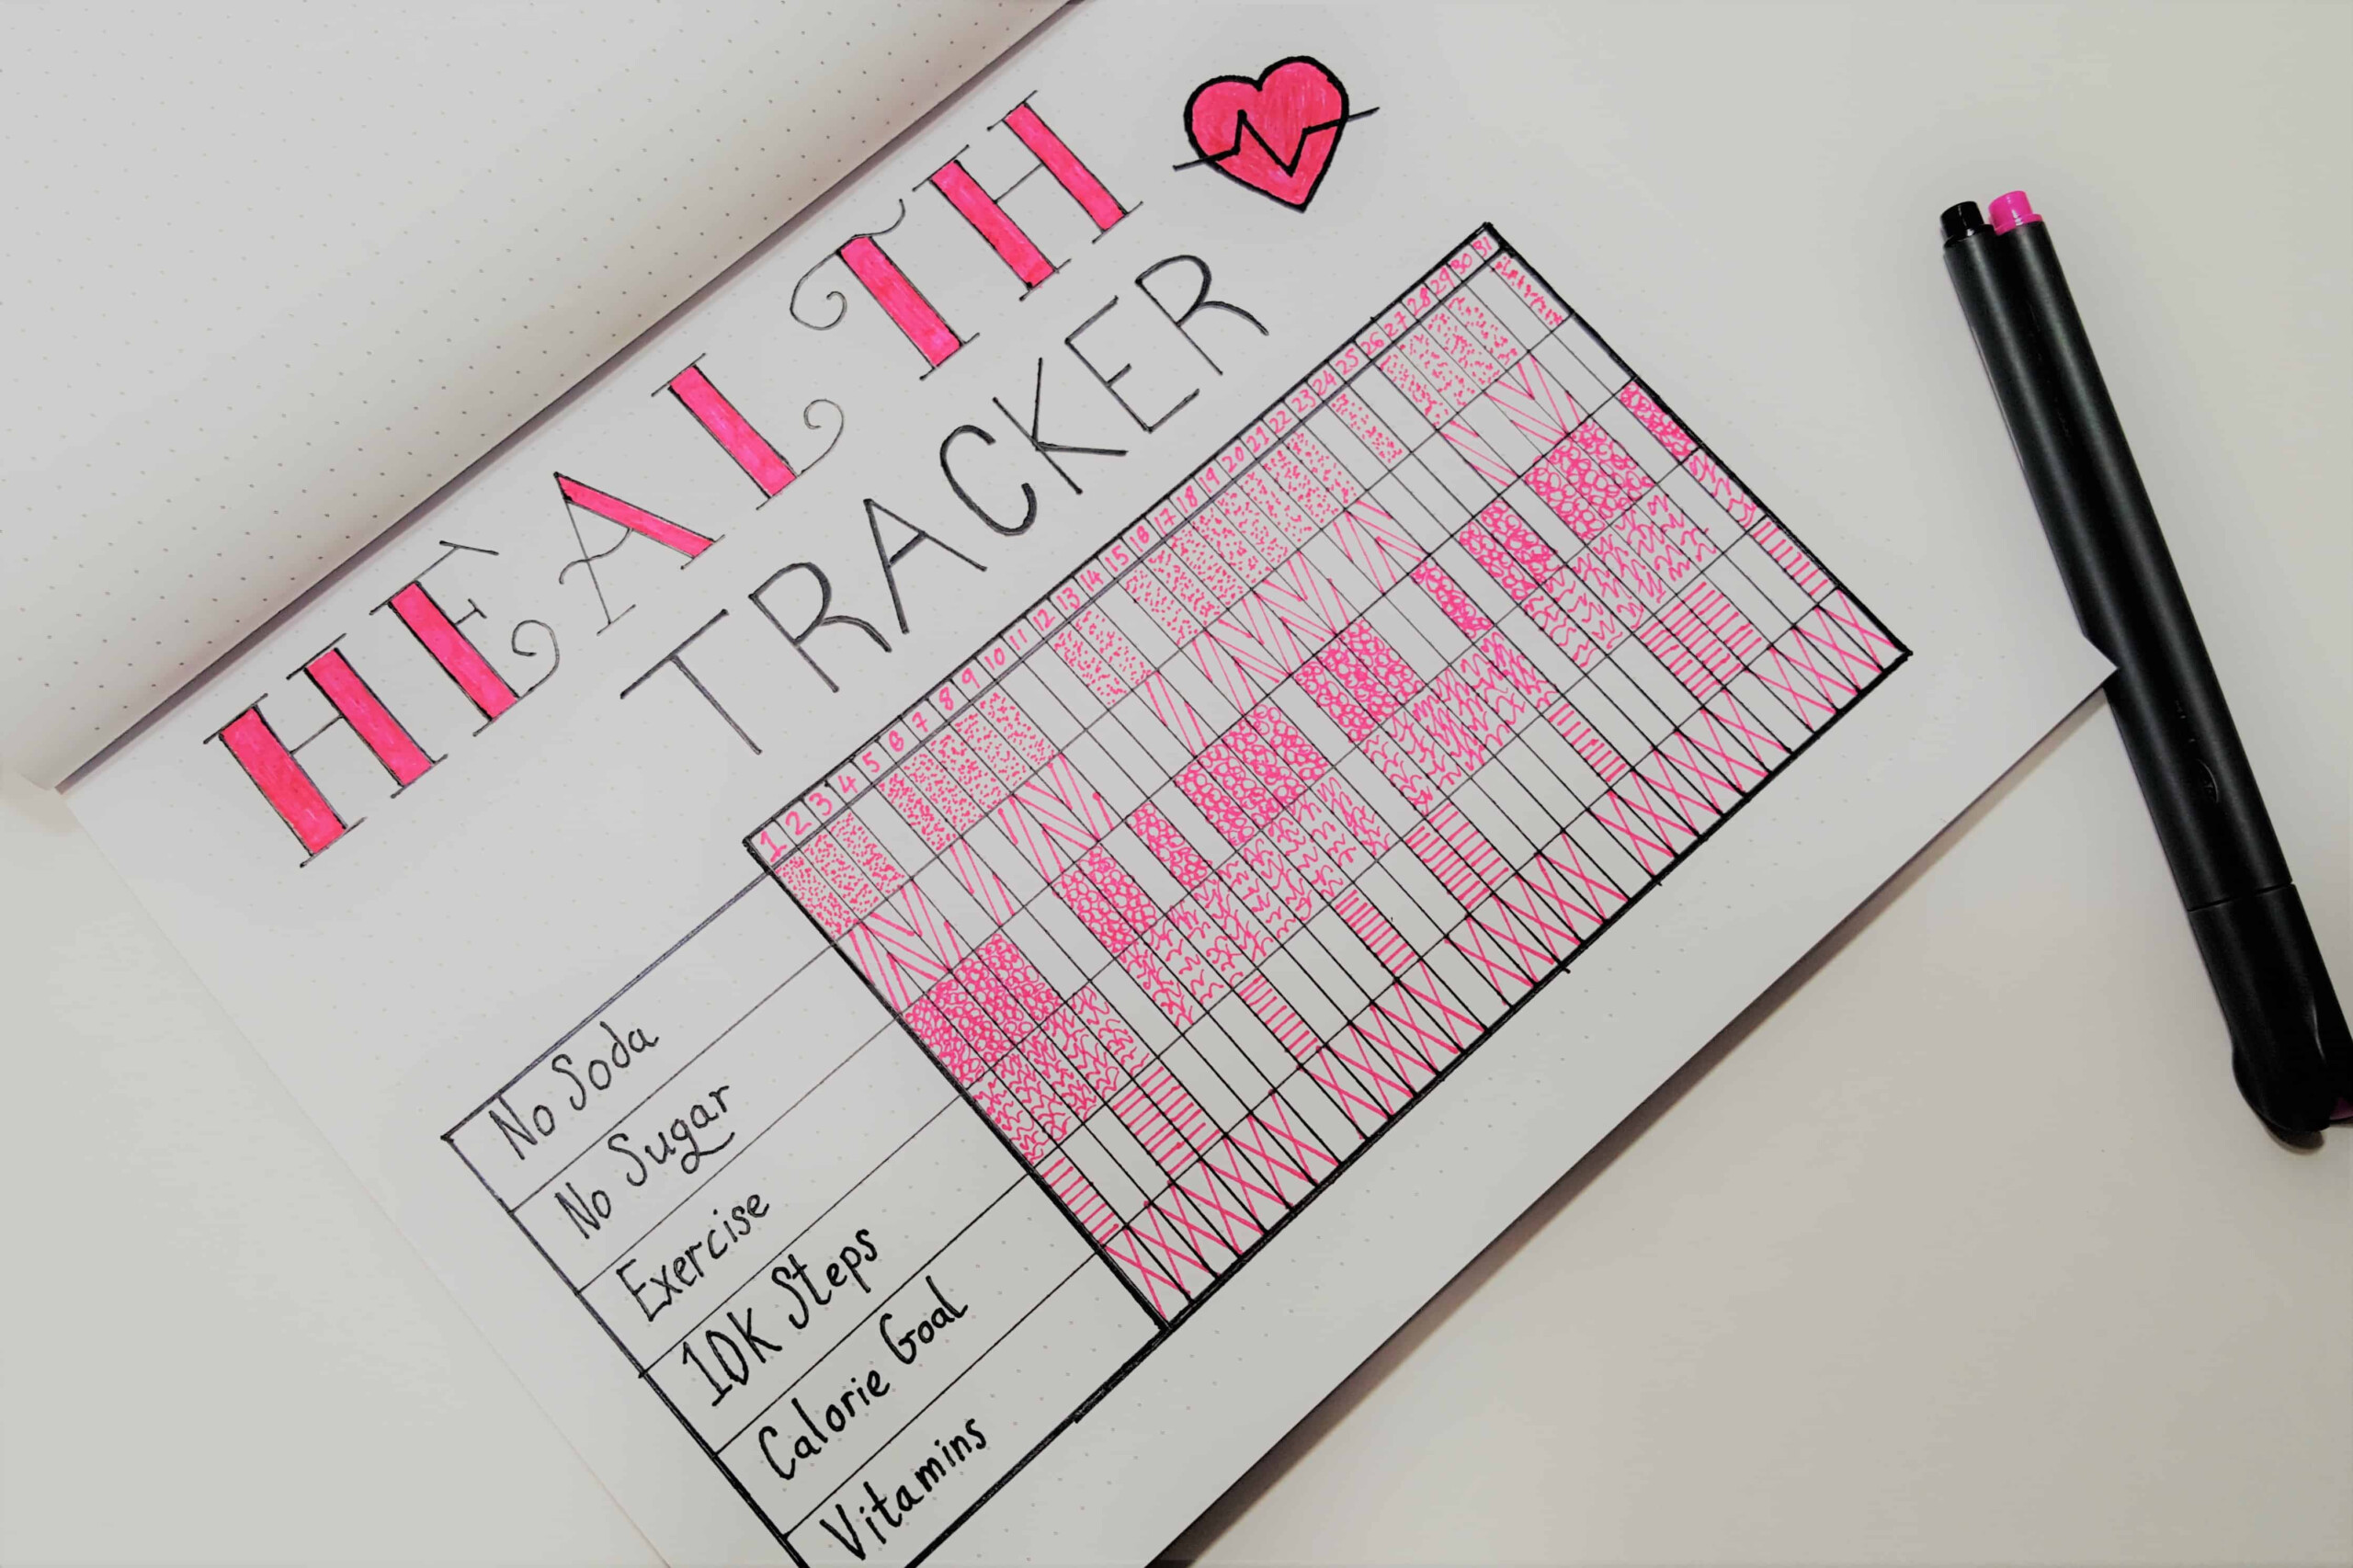 30 Totally Awesome Habit Tracker Ideas In Your Bullet Journal For